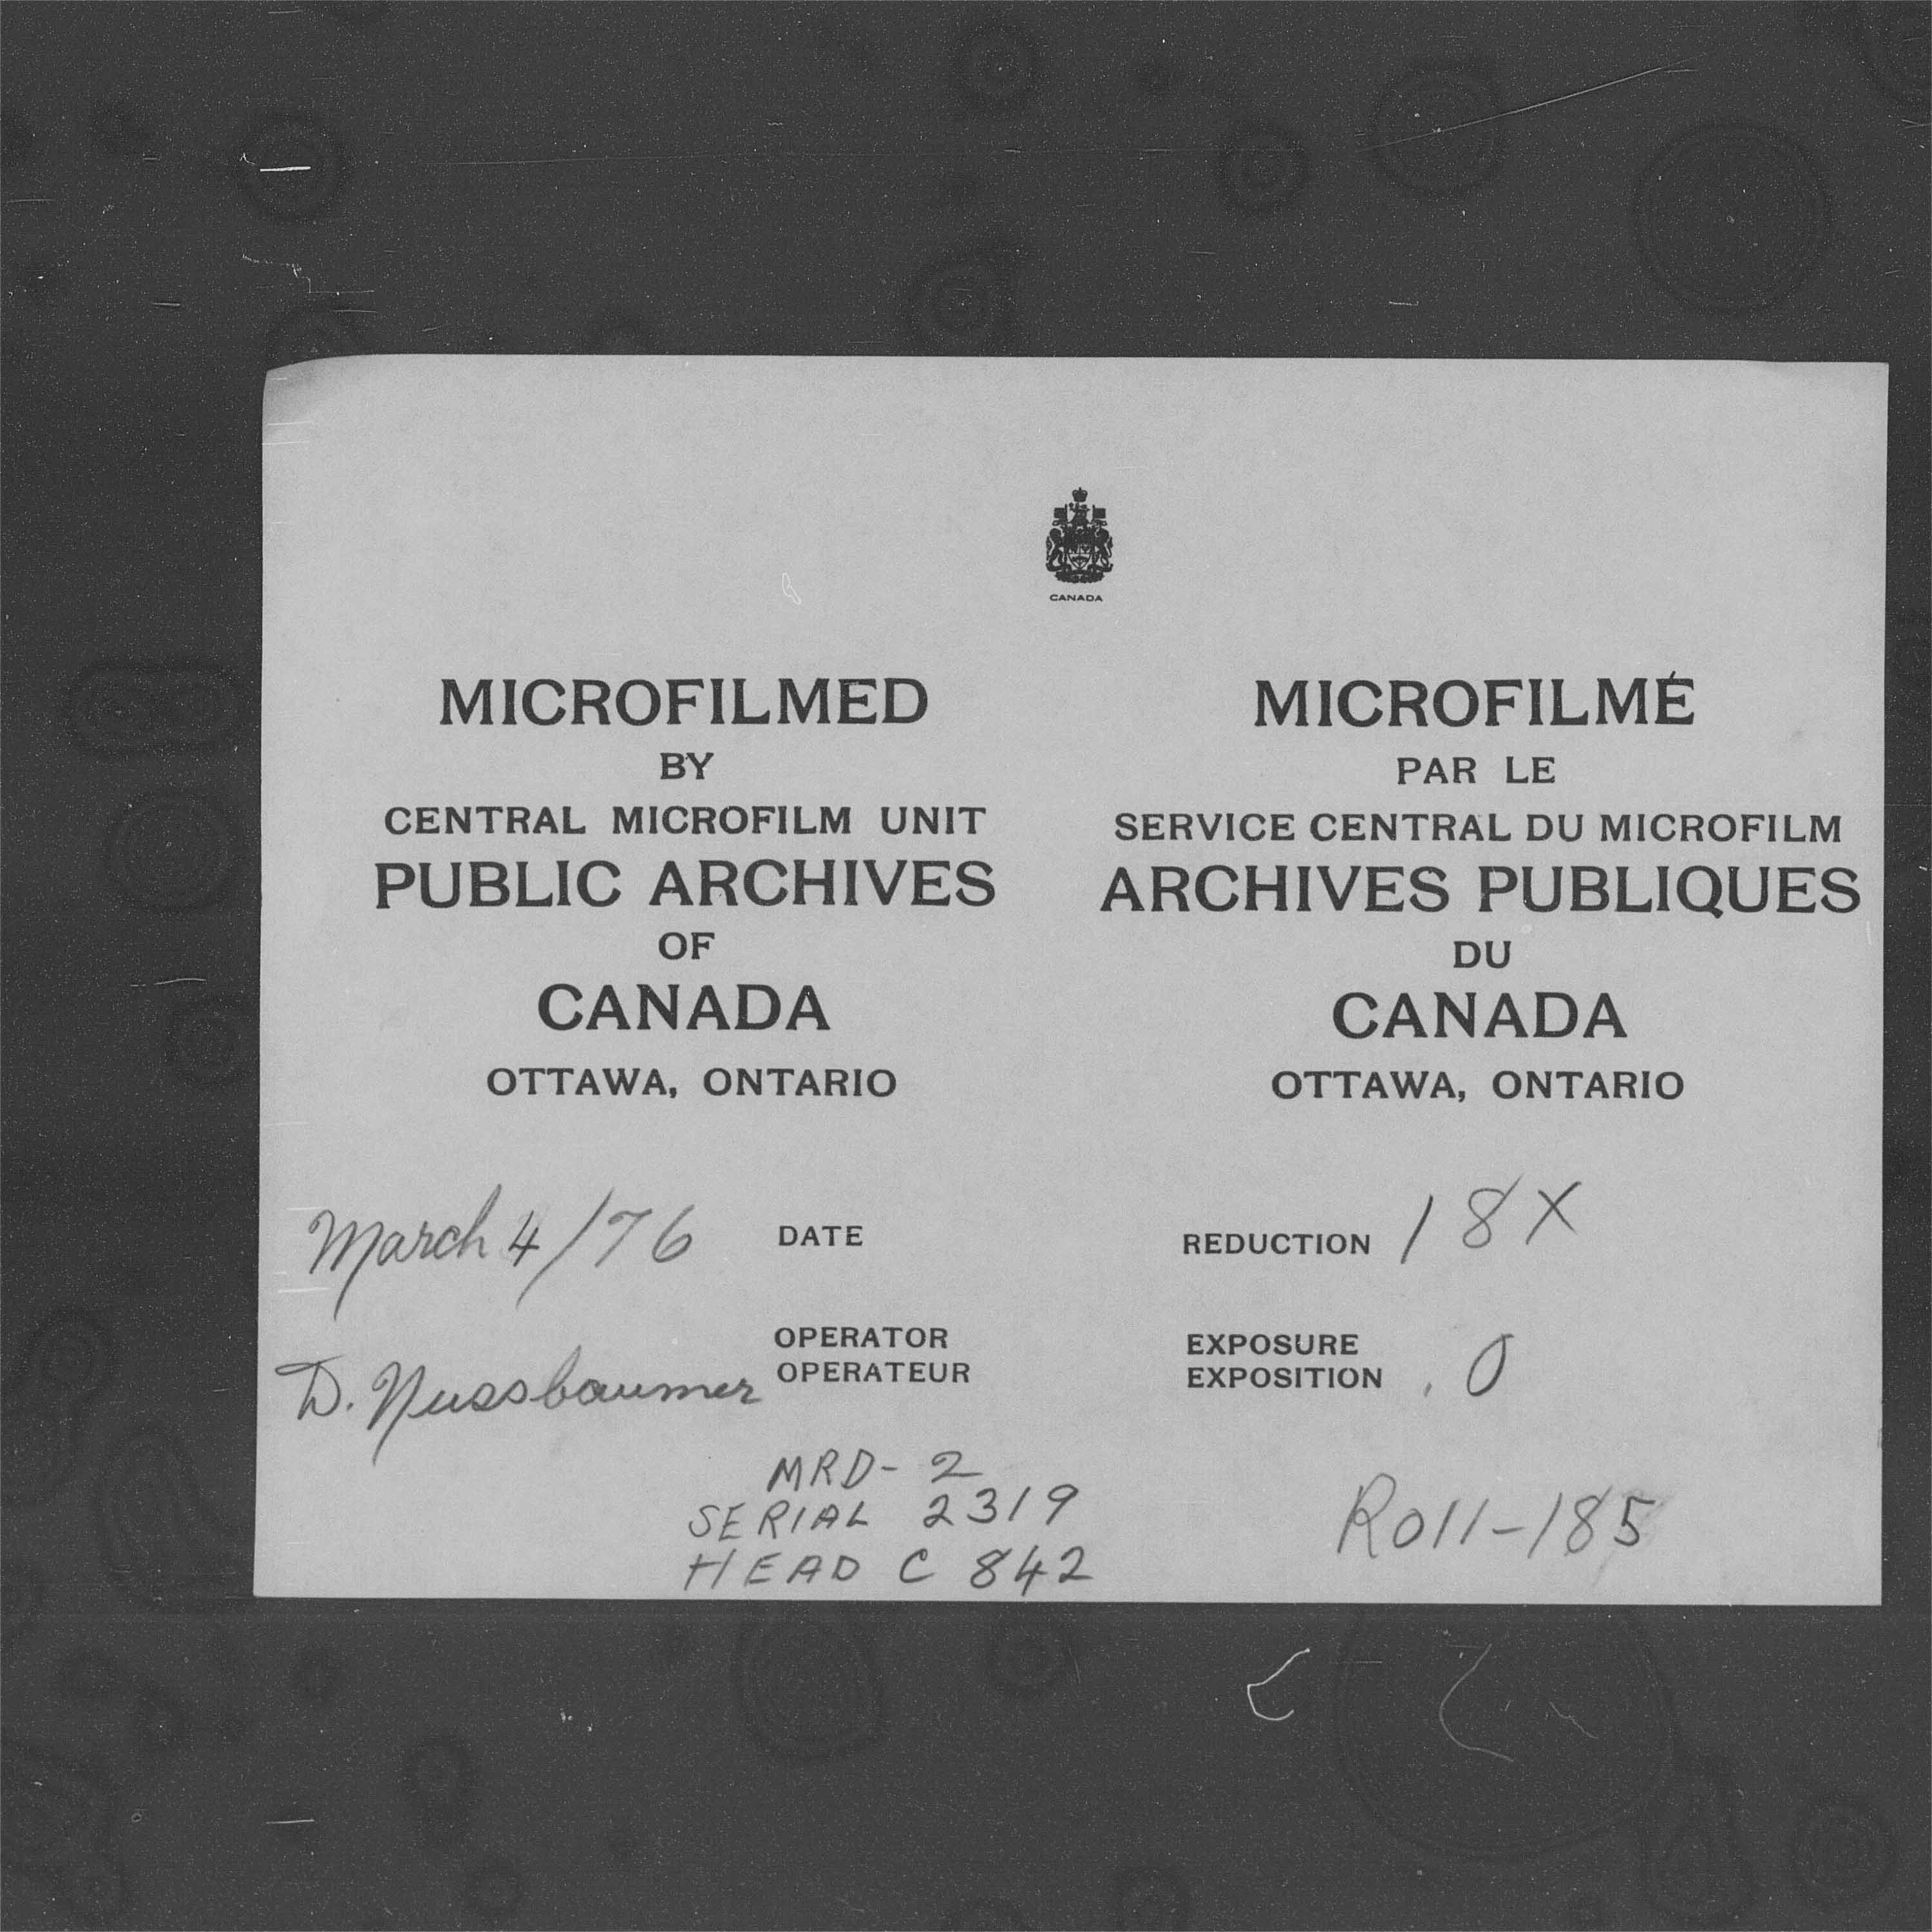 Title: Census of Canada, 1871 - Mikan Number: 142105 - Microform: c-10071